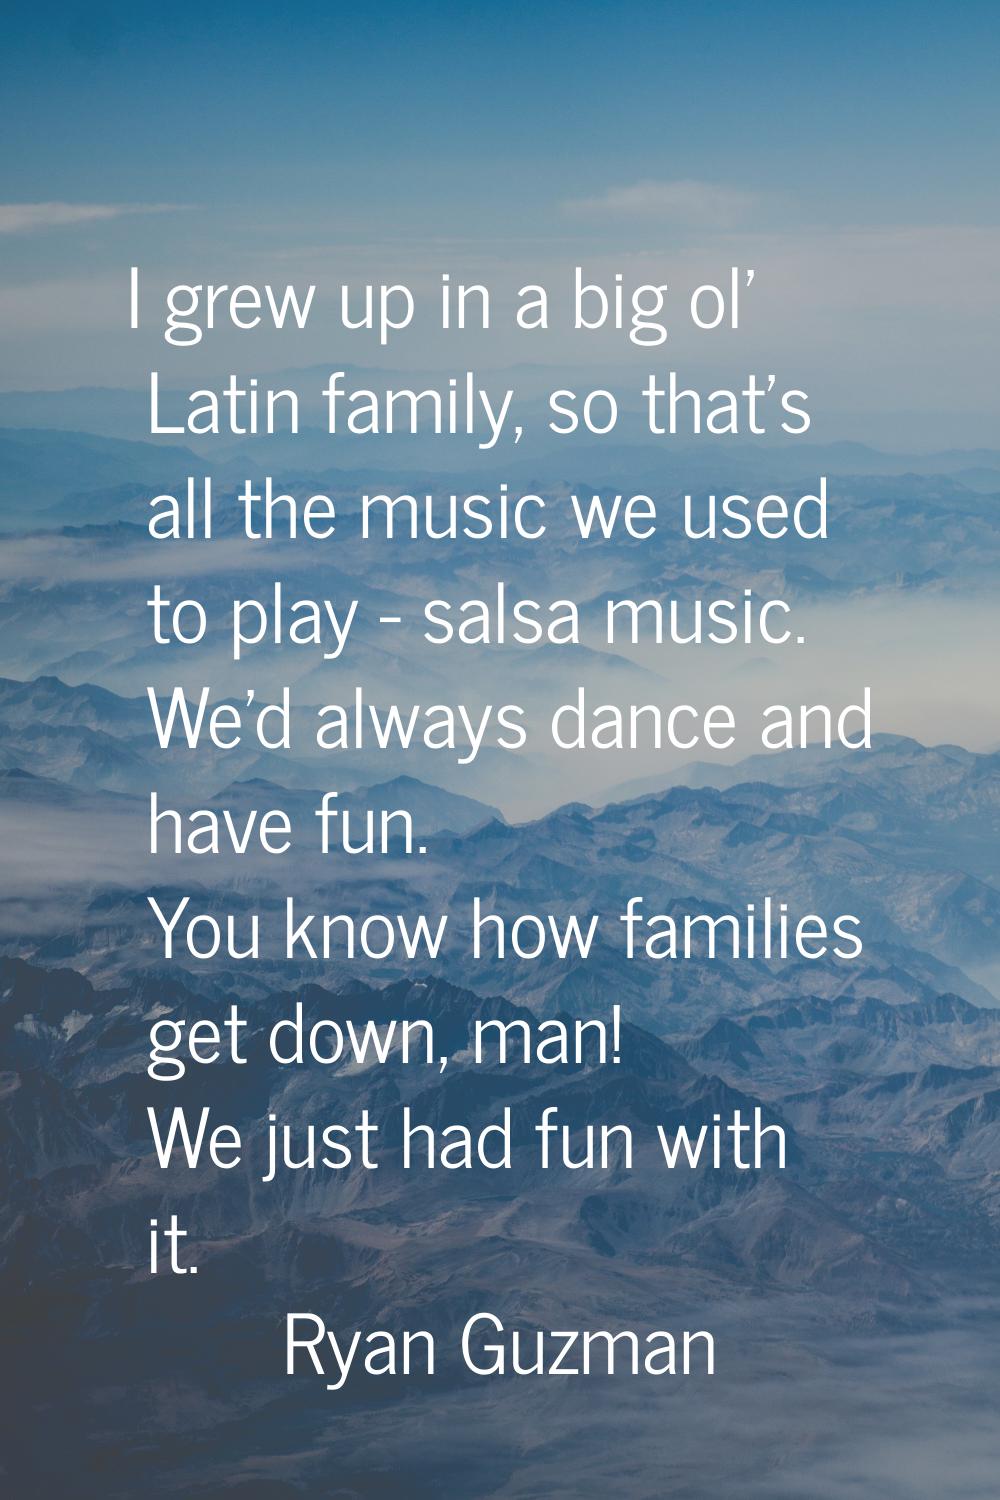 I grew up in a big ol' Latin family, so that's all the music we used to play - salsa music. We'd al